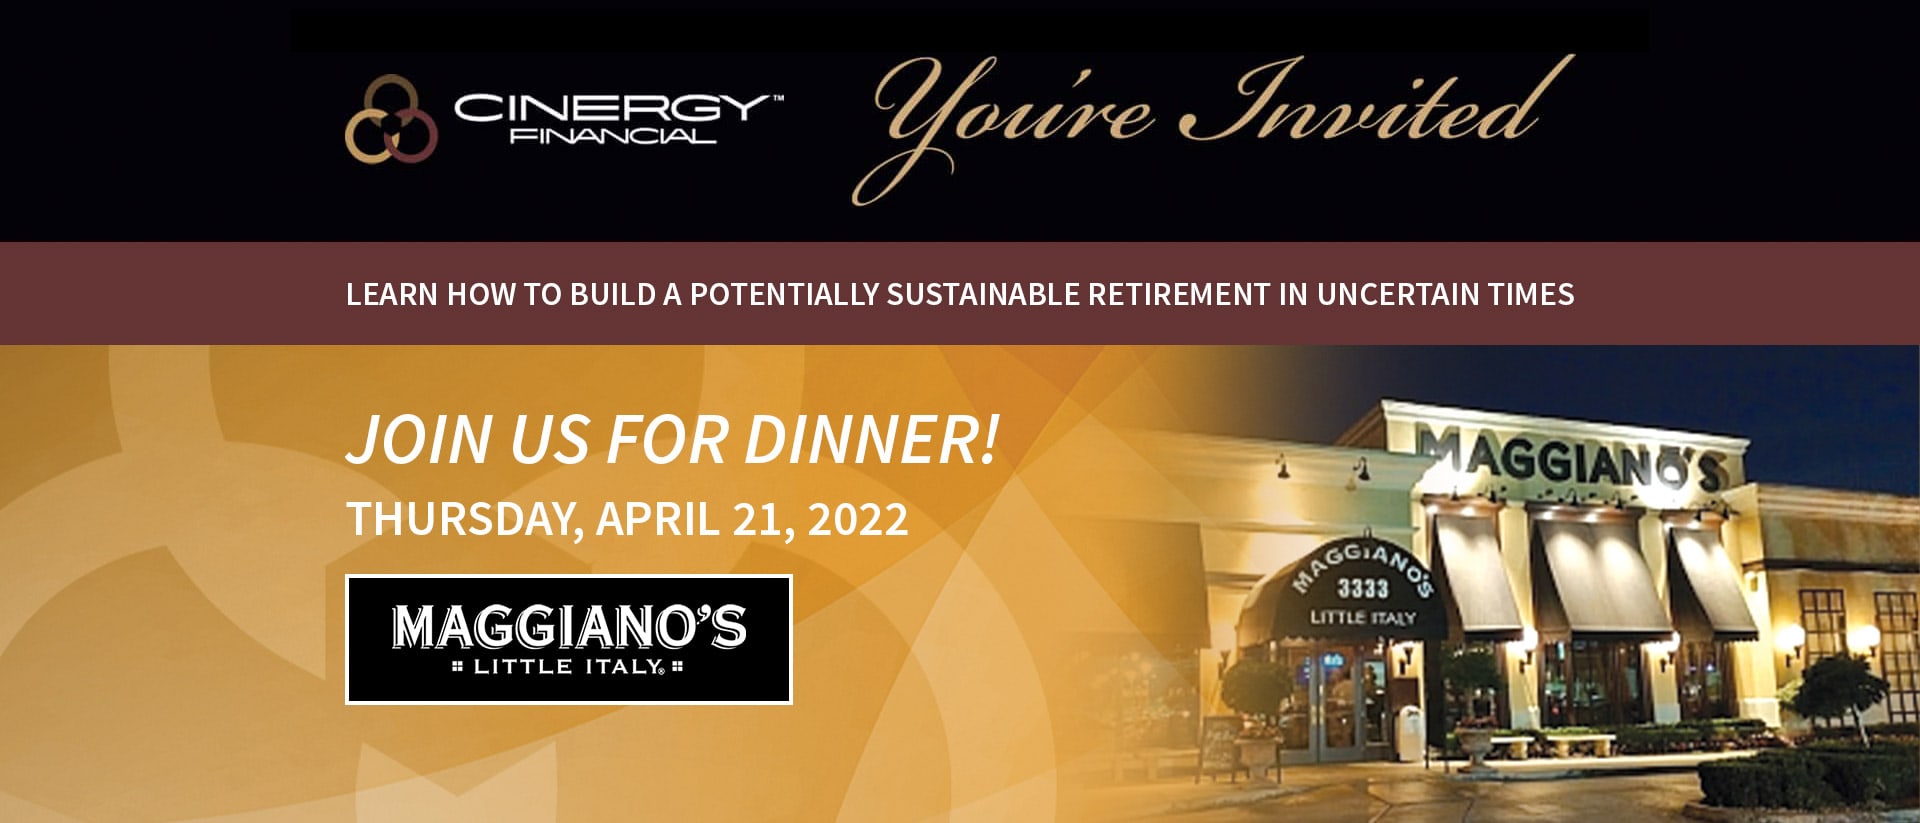 Event cinergy financial literacy maggianos 04-21-22